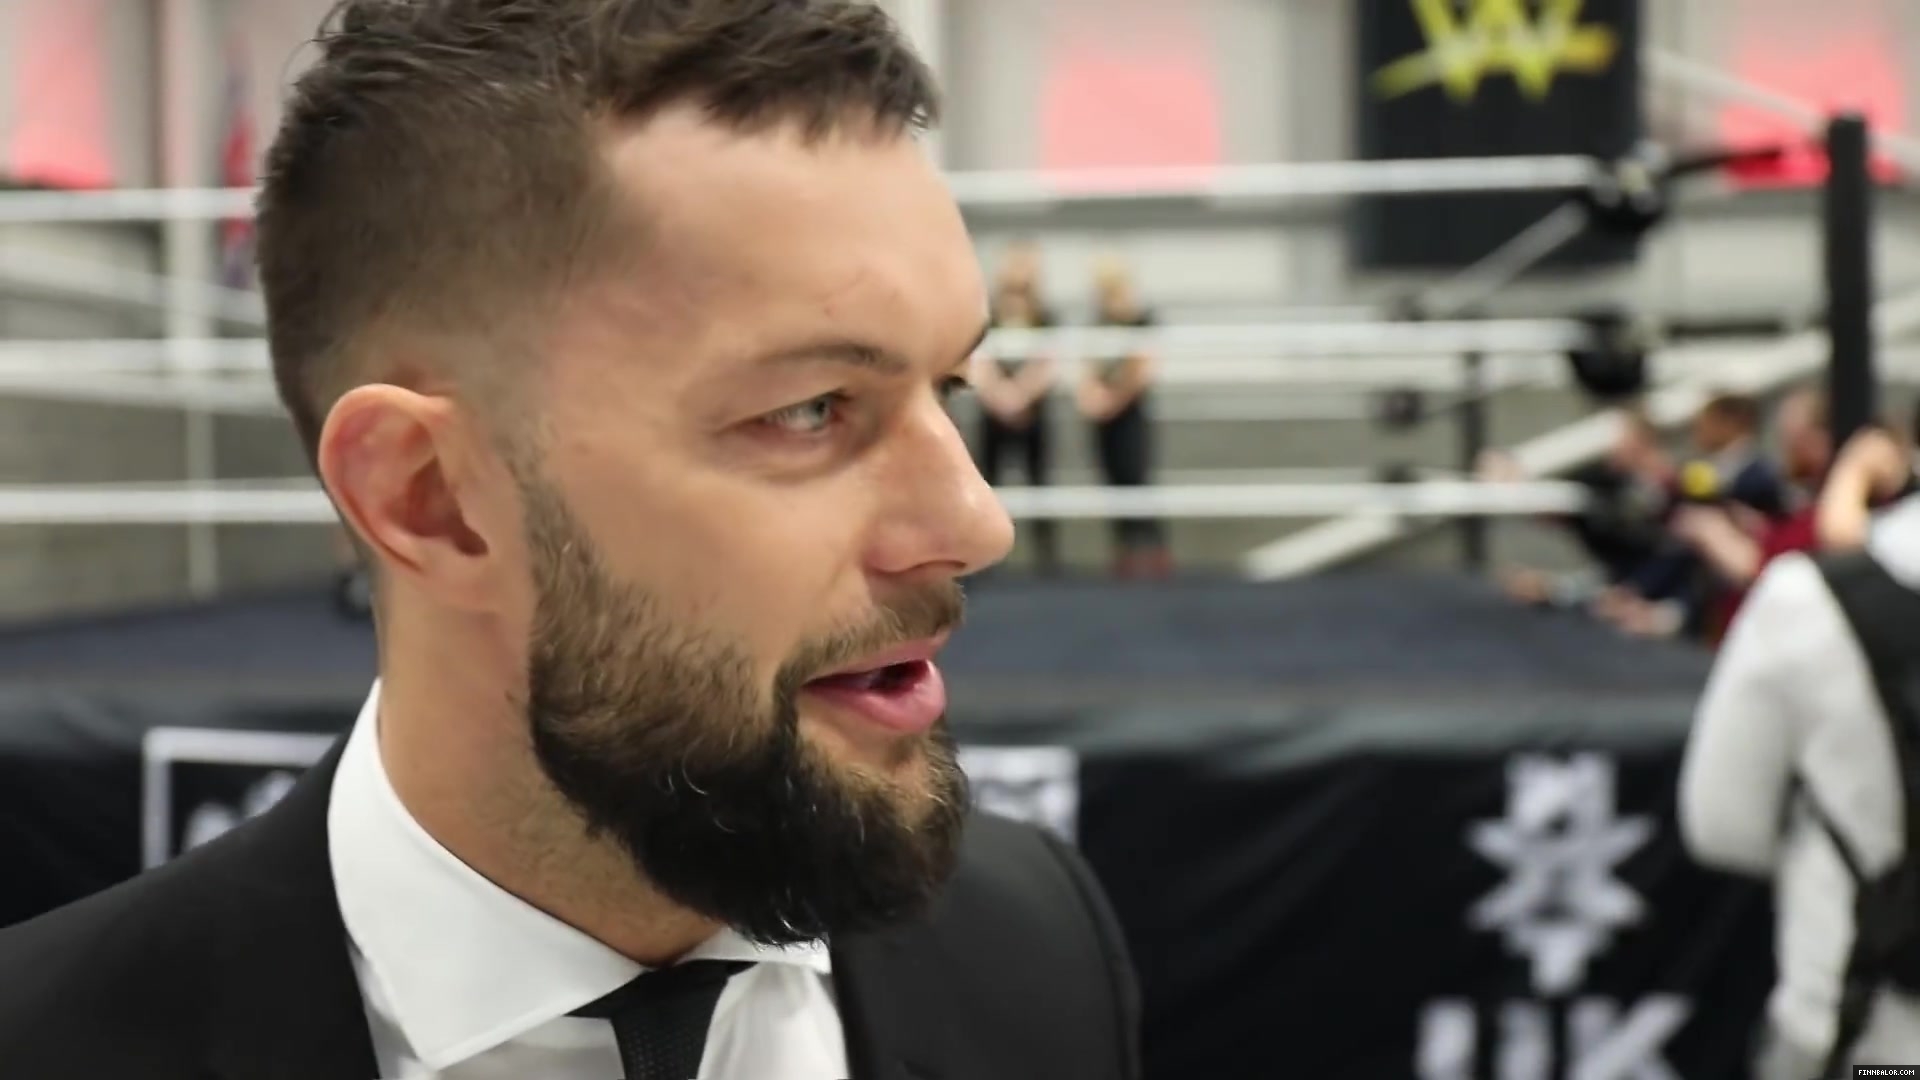 WWE_Superstar_FINN_BALOR_joins_MOUSTACHE_MOUNTAIN_at_the_opening_of_the_NXT_UK_PC_058.jpg